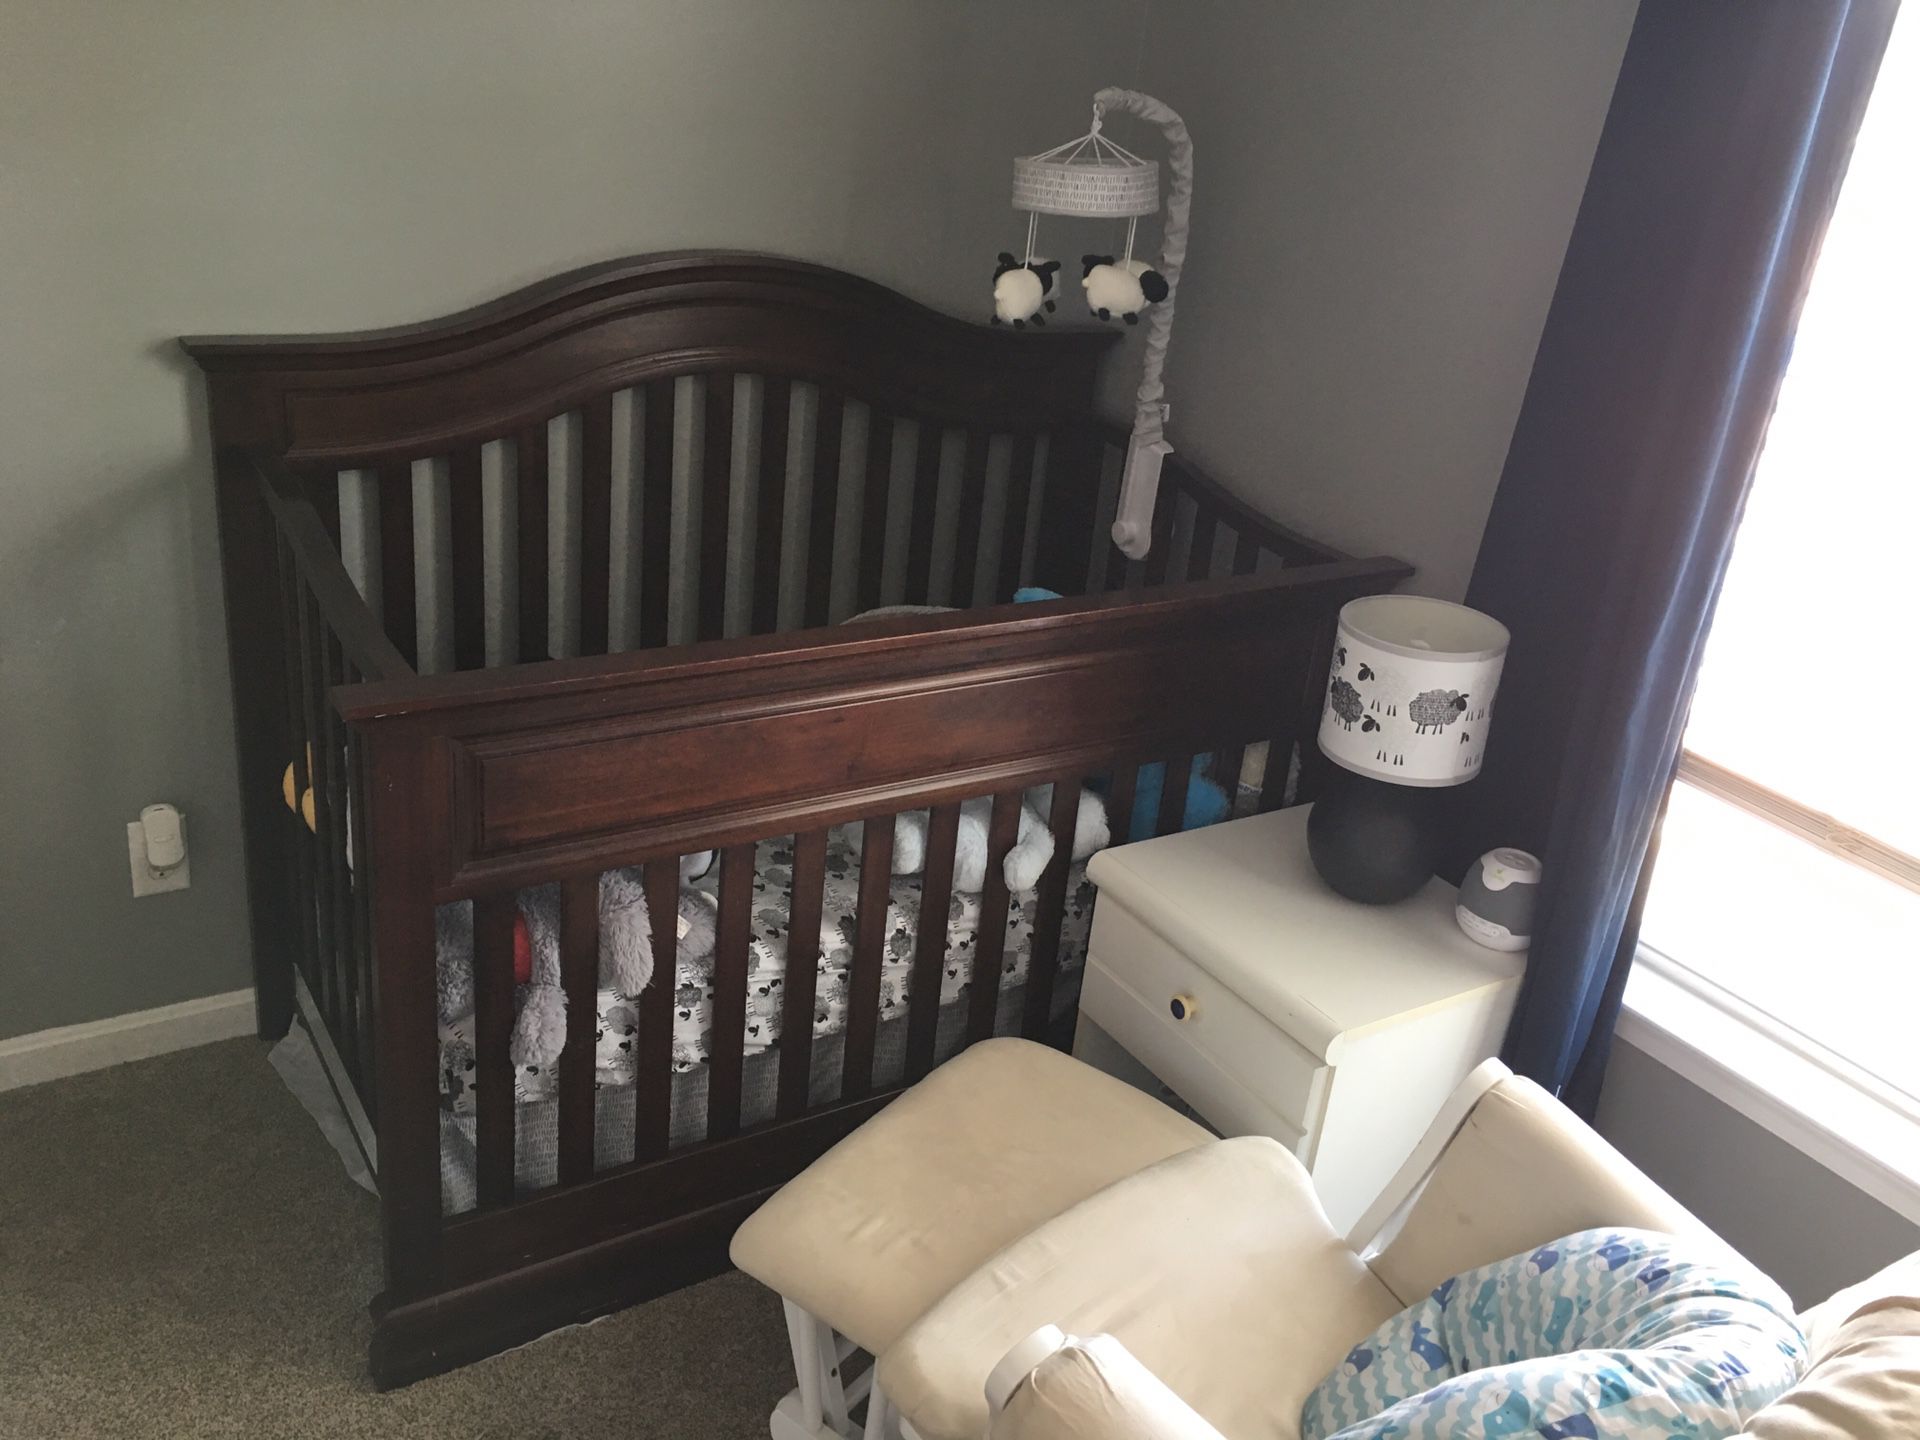 Baby furniture for baby’s room